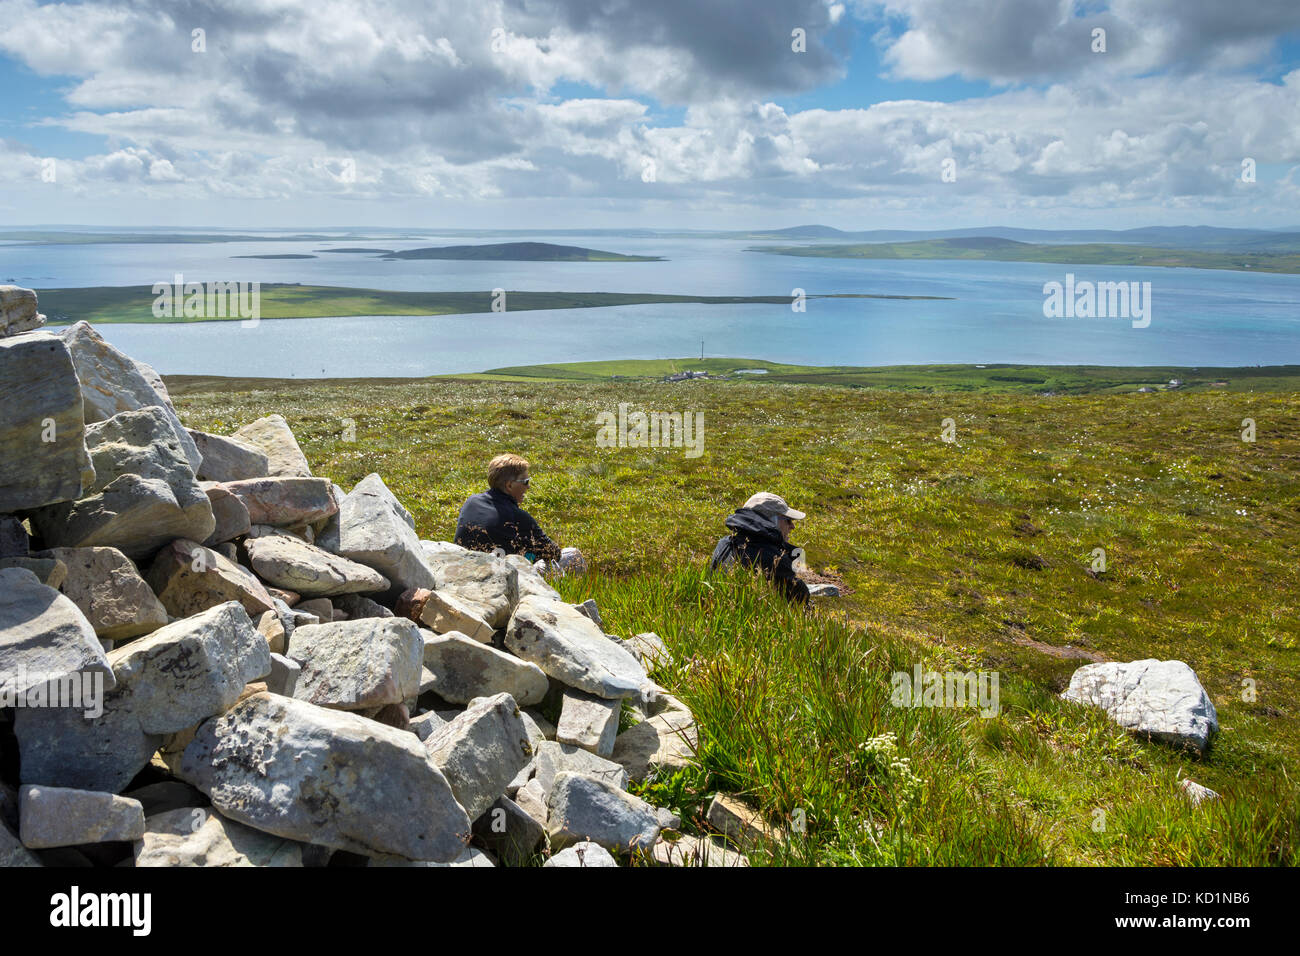 The islands of Wyre, Gairsay and the distant Shapinsay from the summit of Knitchen Hill, Rousay, Orkney Islands, Scotland, UK. Stock Photo